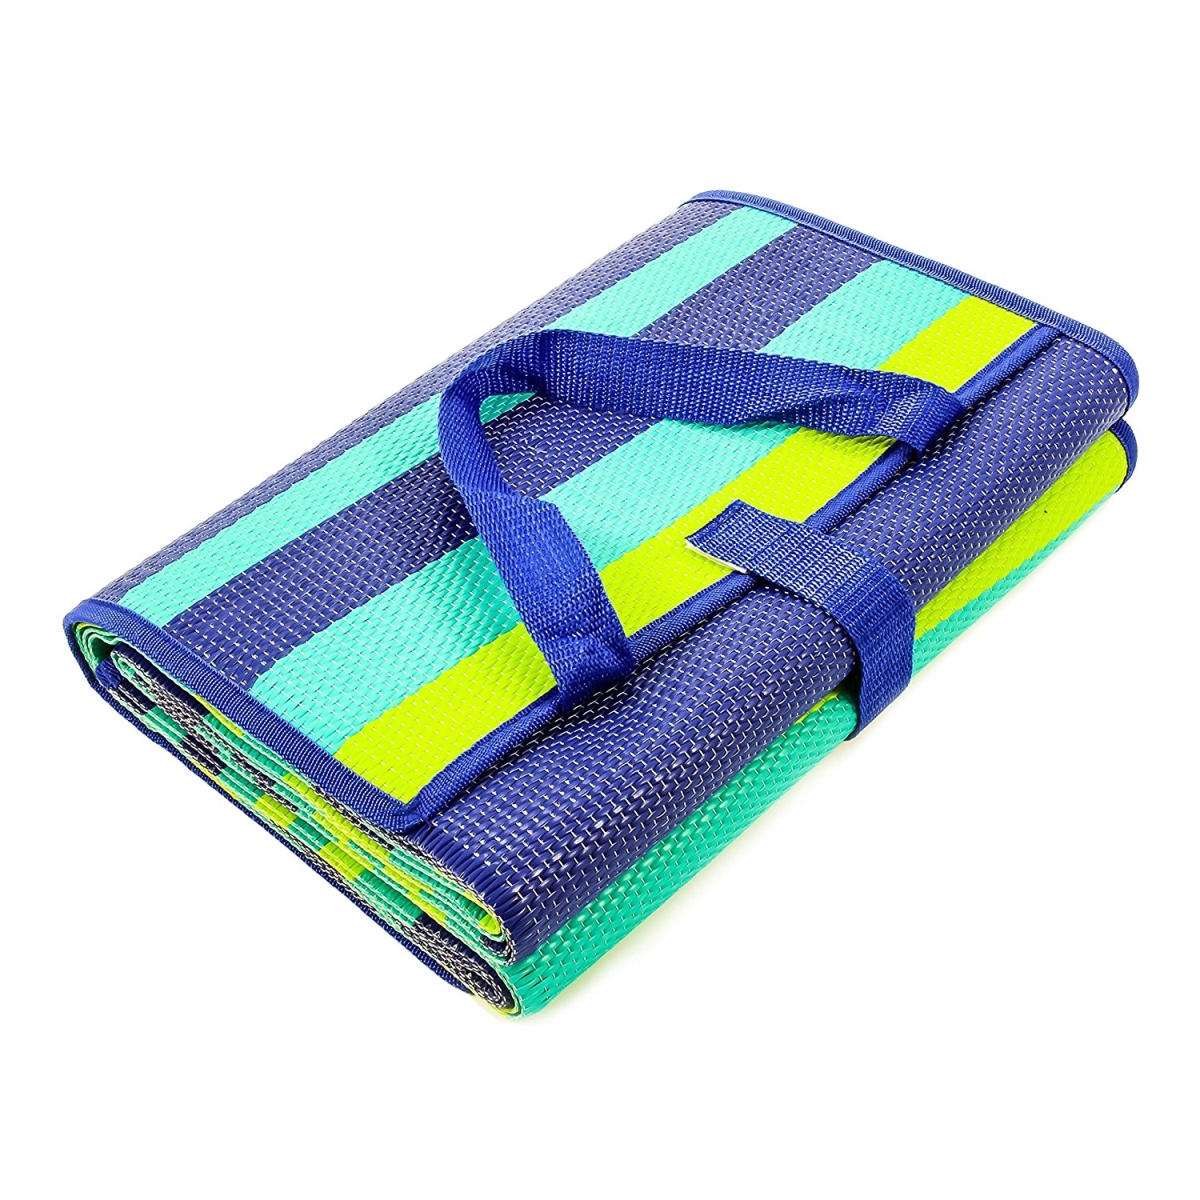 C1w-42806 Striped Handy Mat With Strap - Blue, Turquoise & Green